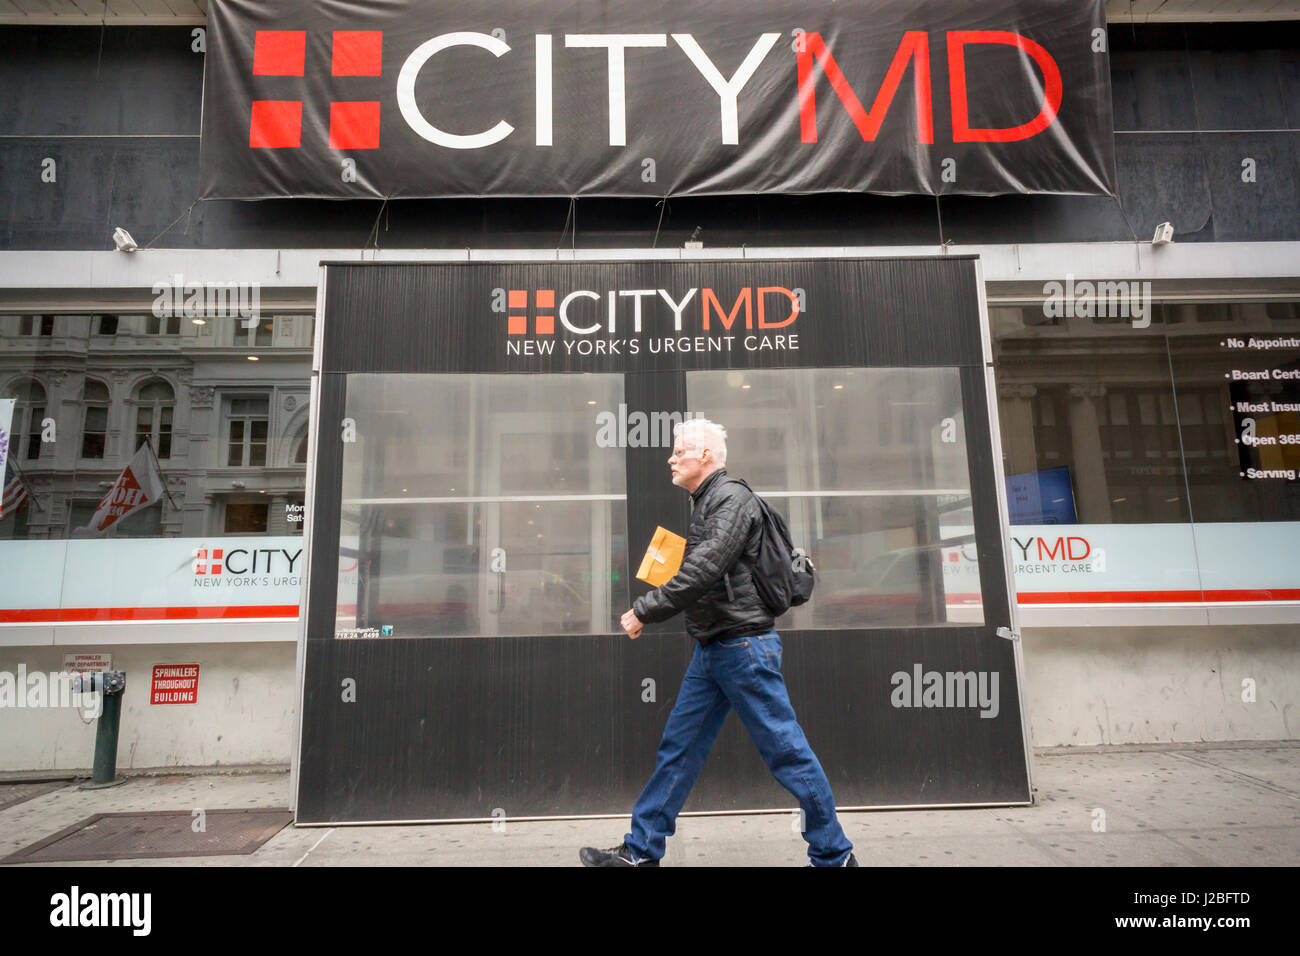 A CityMD urgent care facility in New York on Wednesday, April 19, 2017. Warburg Pincus LLC, a private equity firm, announced that it will acquire a majority stake in CityMD with the transaction being reported in the vicinity of $600 million. (© Richard B. Levine) Stock Photo